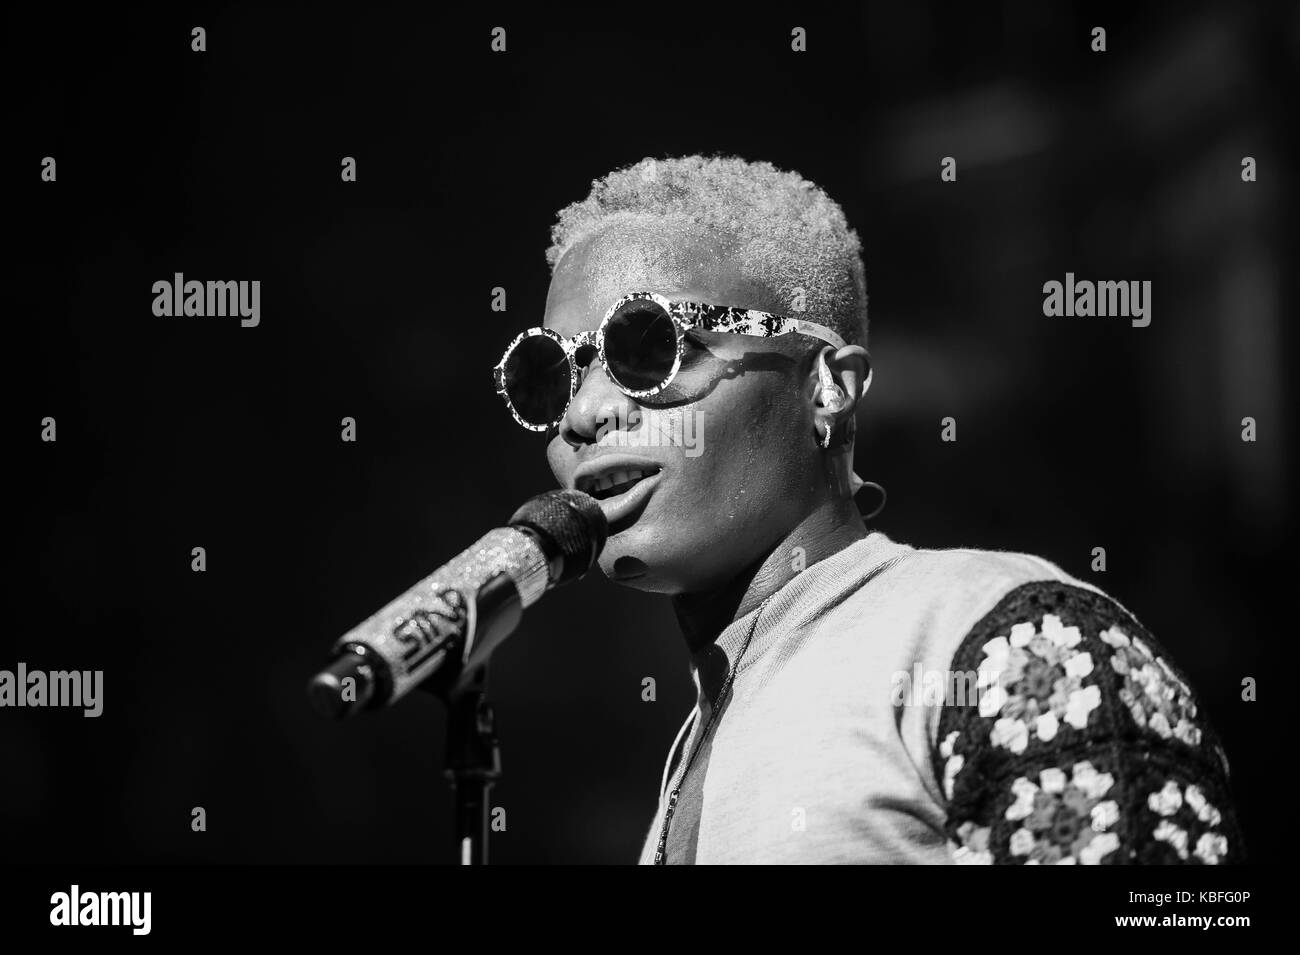 London, United Kingdom. September 29, 2017. Wizkid performs live on stage at Royal Albert Hall. Michael Tubi / Alamy Live News Stock Photo